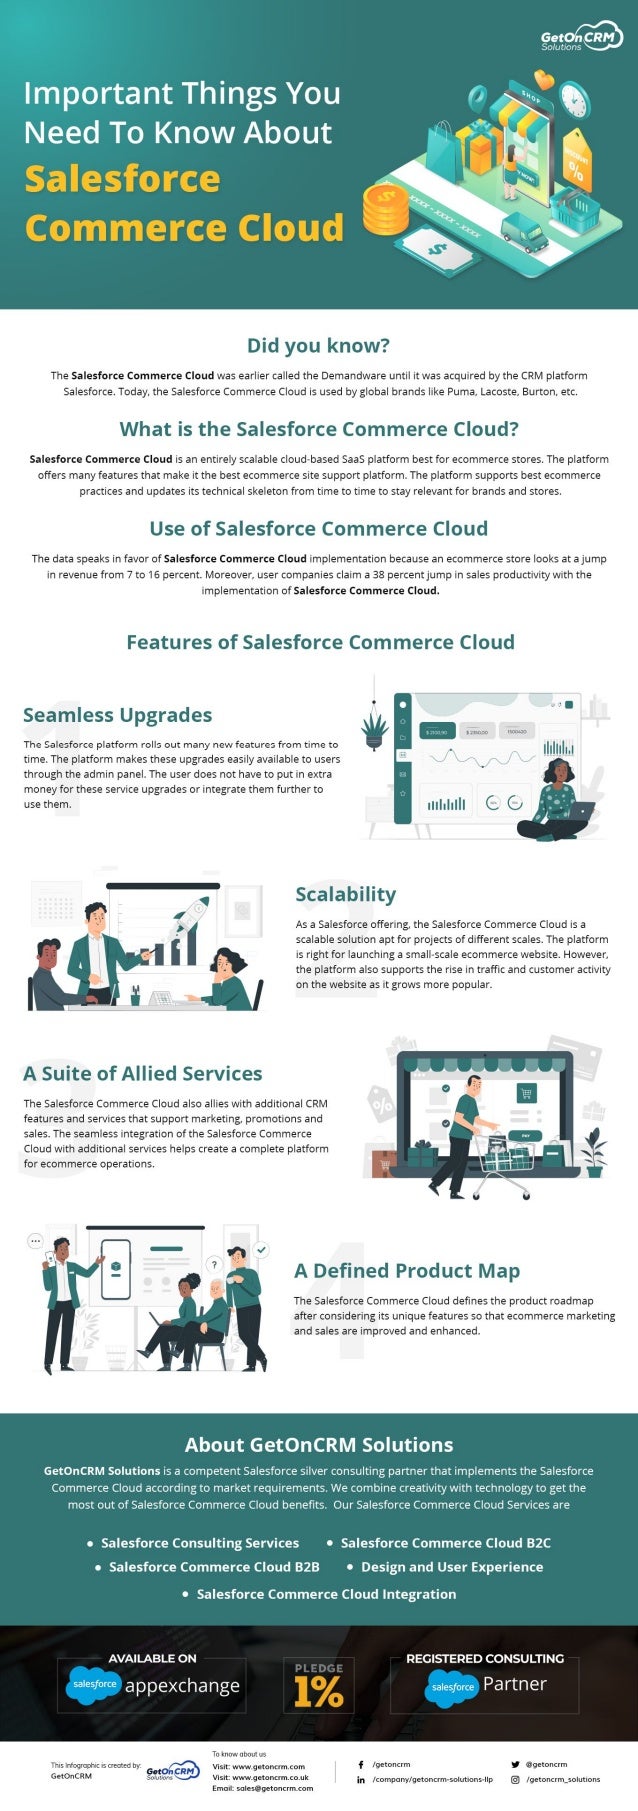 Important Things You Need To Know About Salesforce Commerce Cloud